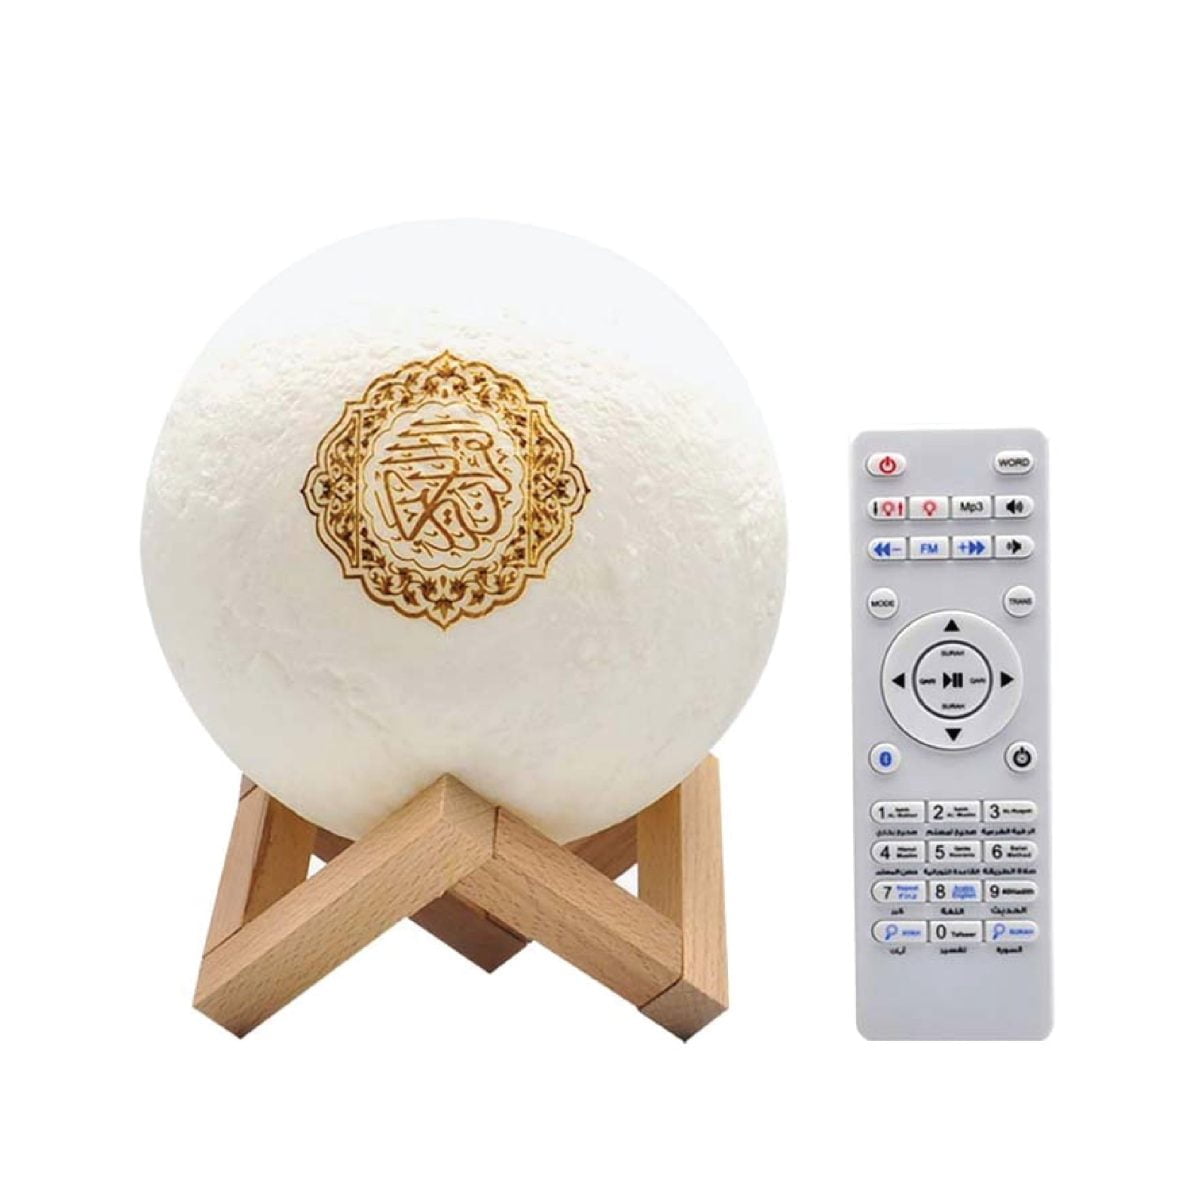 Weqweasd 23 Moon Lamp Qur'An Speaker - Moon Lamp With Quran Recitation - Sq-510With Rechargeable Remote Control, Full Recitations Of Famous Imams And Translation Of The Qur'An Into Many Languages, Including English, Arabic, French, Spanish, German, ... Contains 18 Recitations And 15 Languages Moon Lamp Qur'An Speaker Moon Lamp Qur'An Speaker Sq-510 (18 Reciter, 15 Translation)